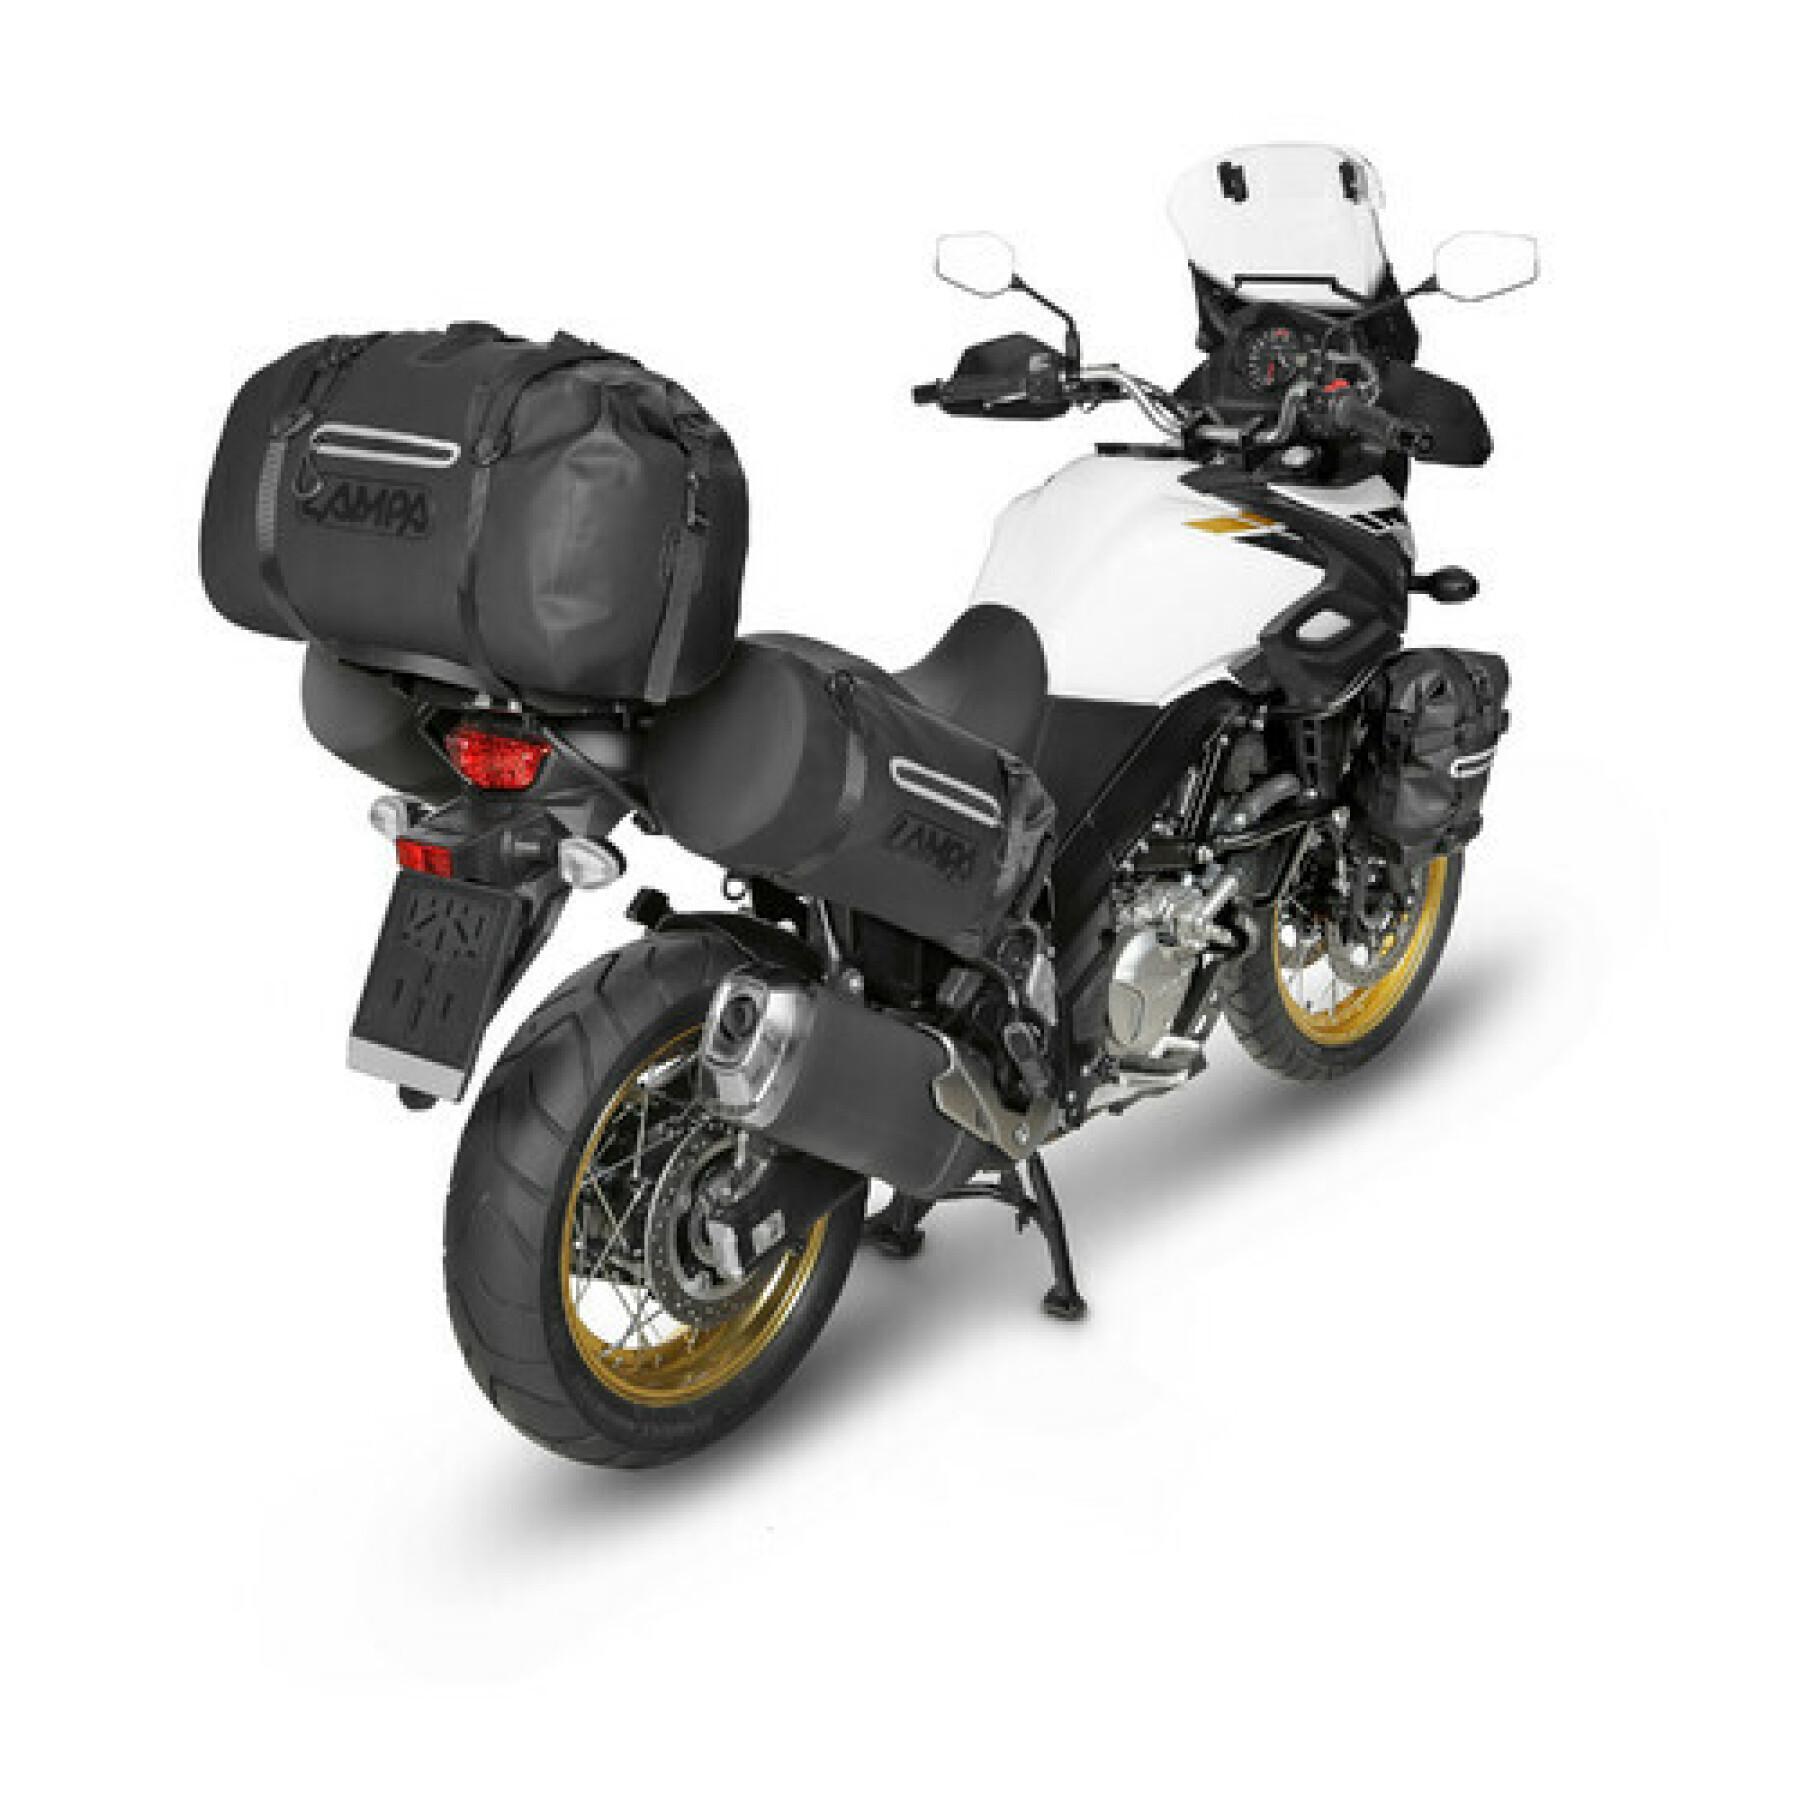 Waterproof motorcycle bag for tyre mounting kit Lampa Impervious 5